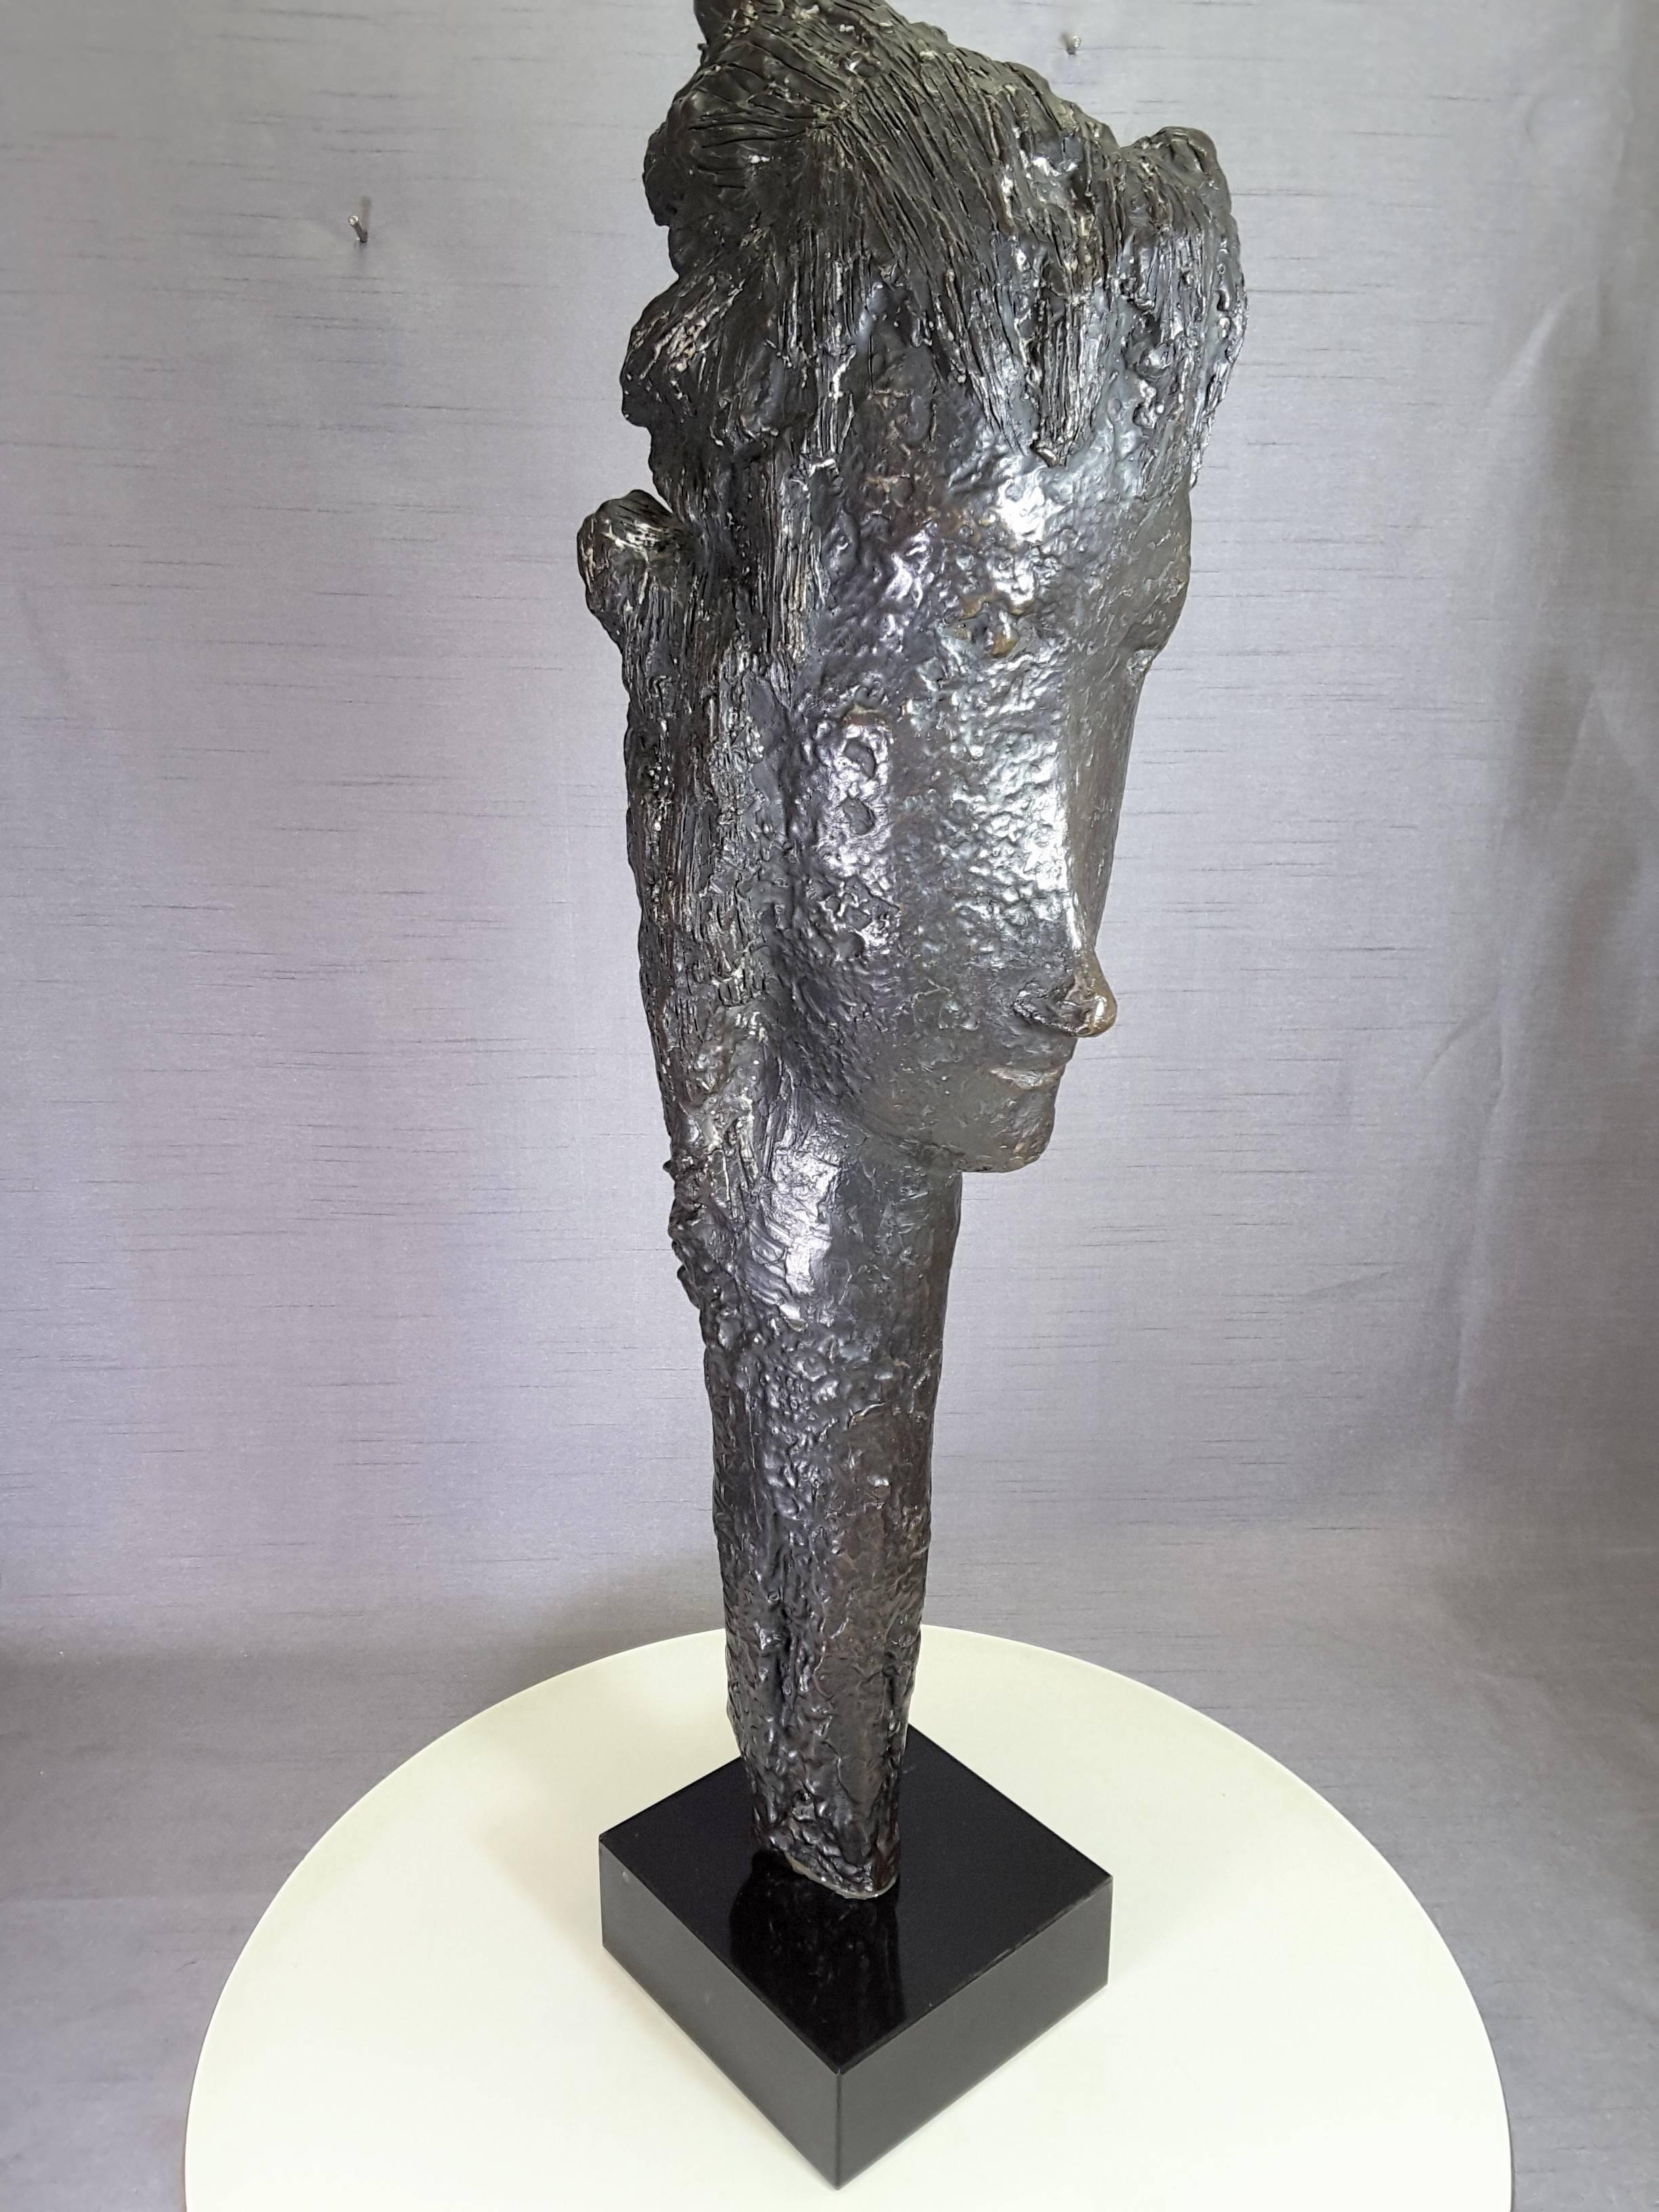 Tall head bronze sculpture by Almuth Lutkenhaus (1930-1996), Modern style head figure with elongated neck, mounted on a black square base. Very Modern in style with the back of the head showing flowing hair. The head measures 24